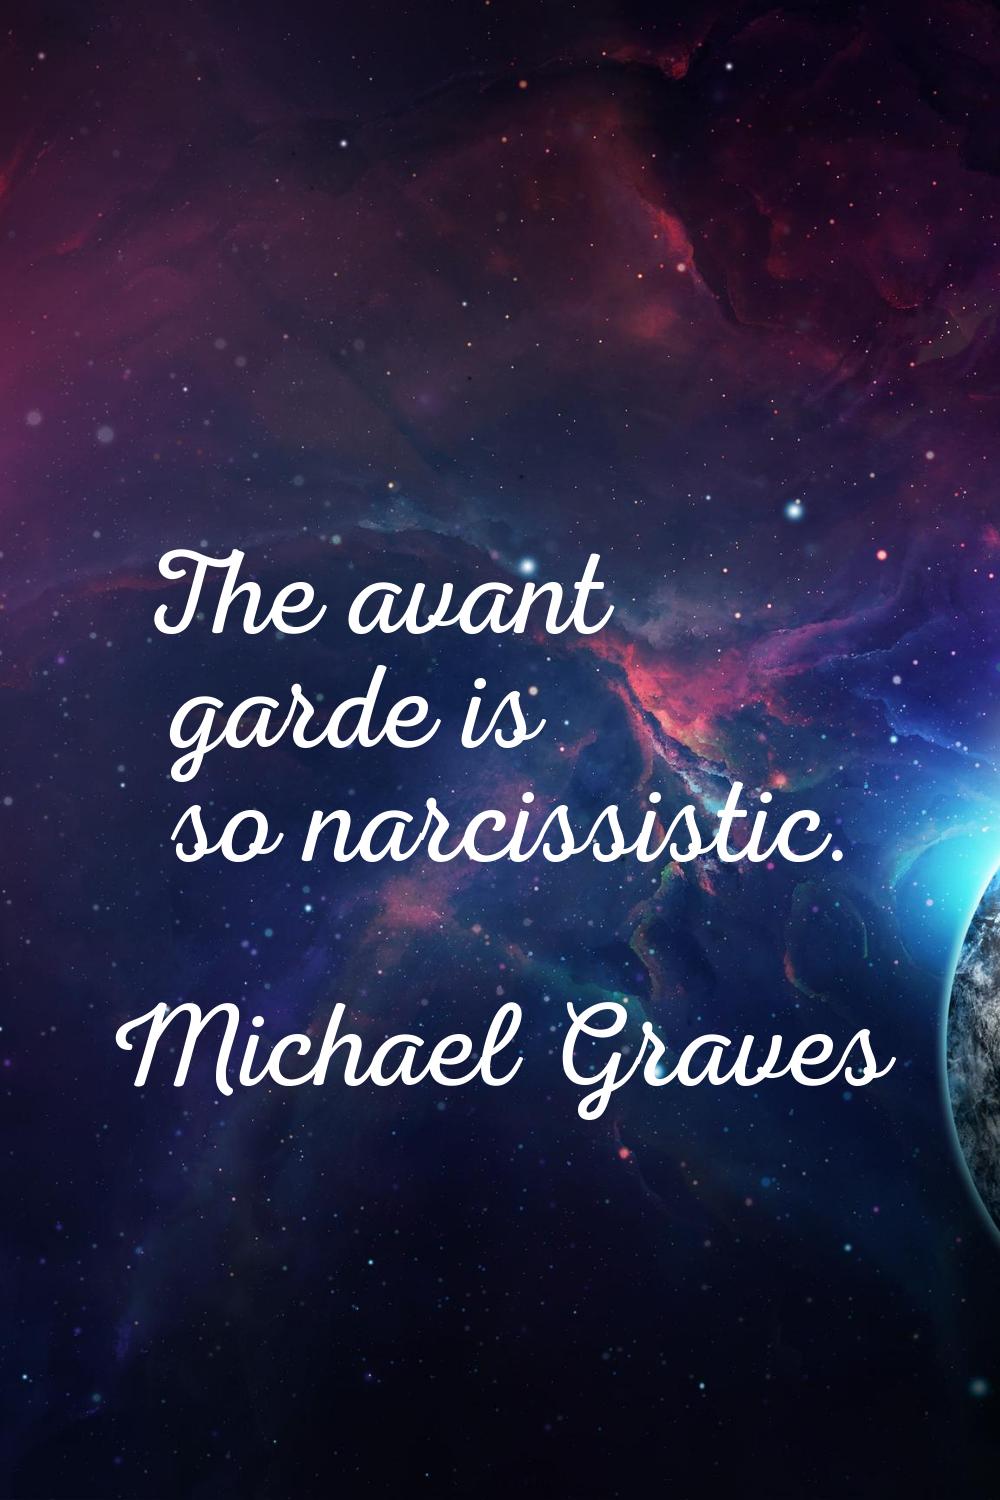 The avant garde is so narcissistic.